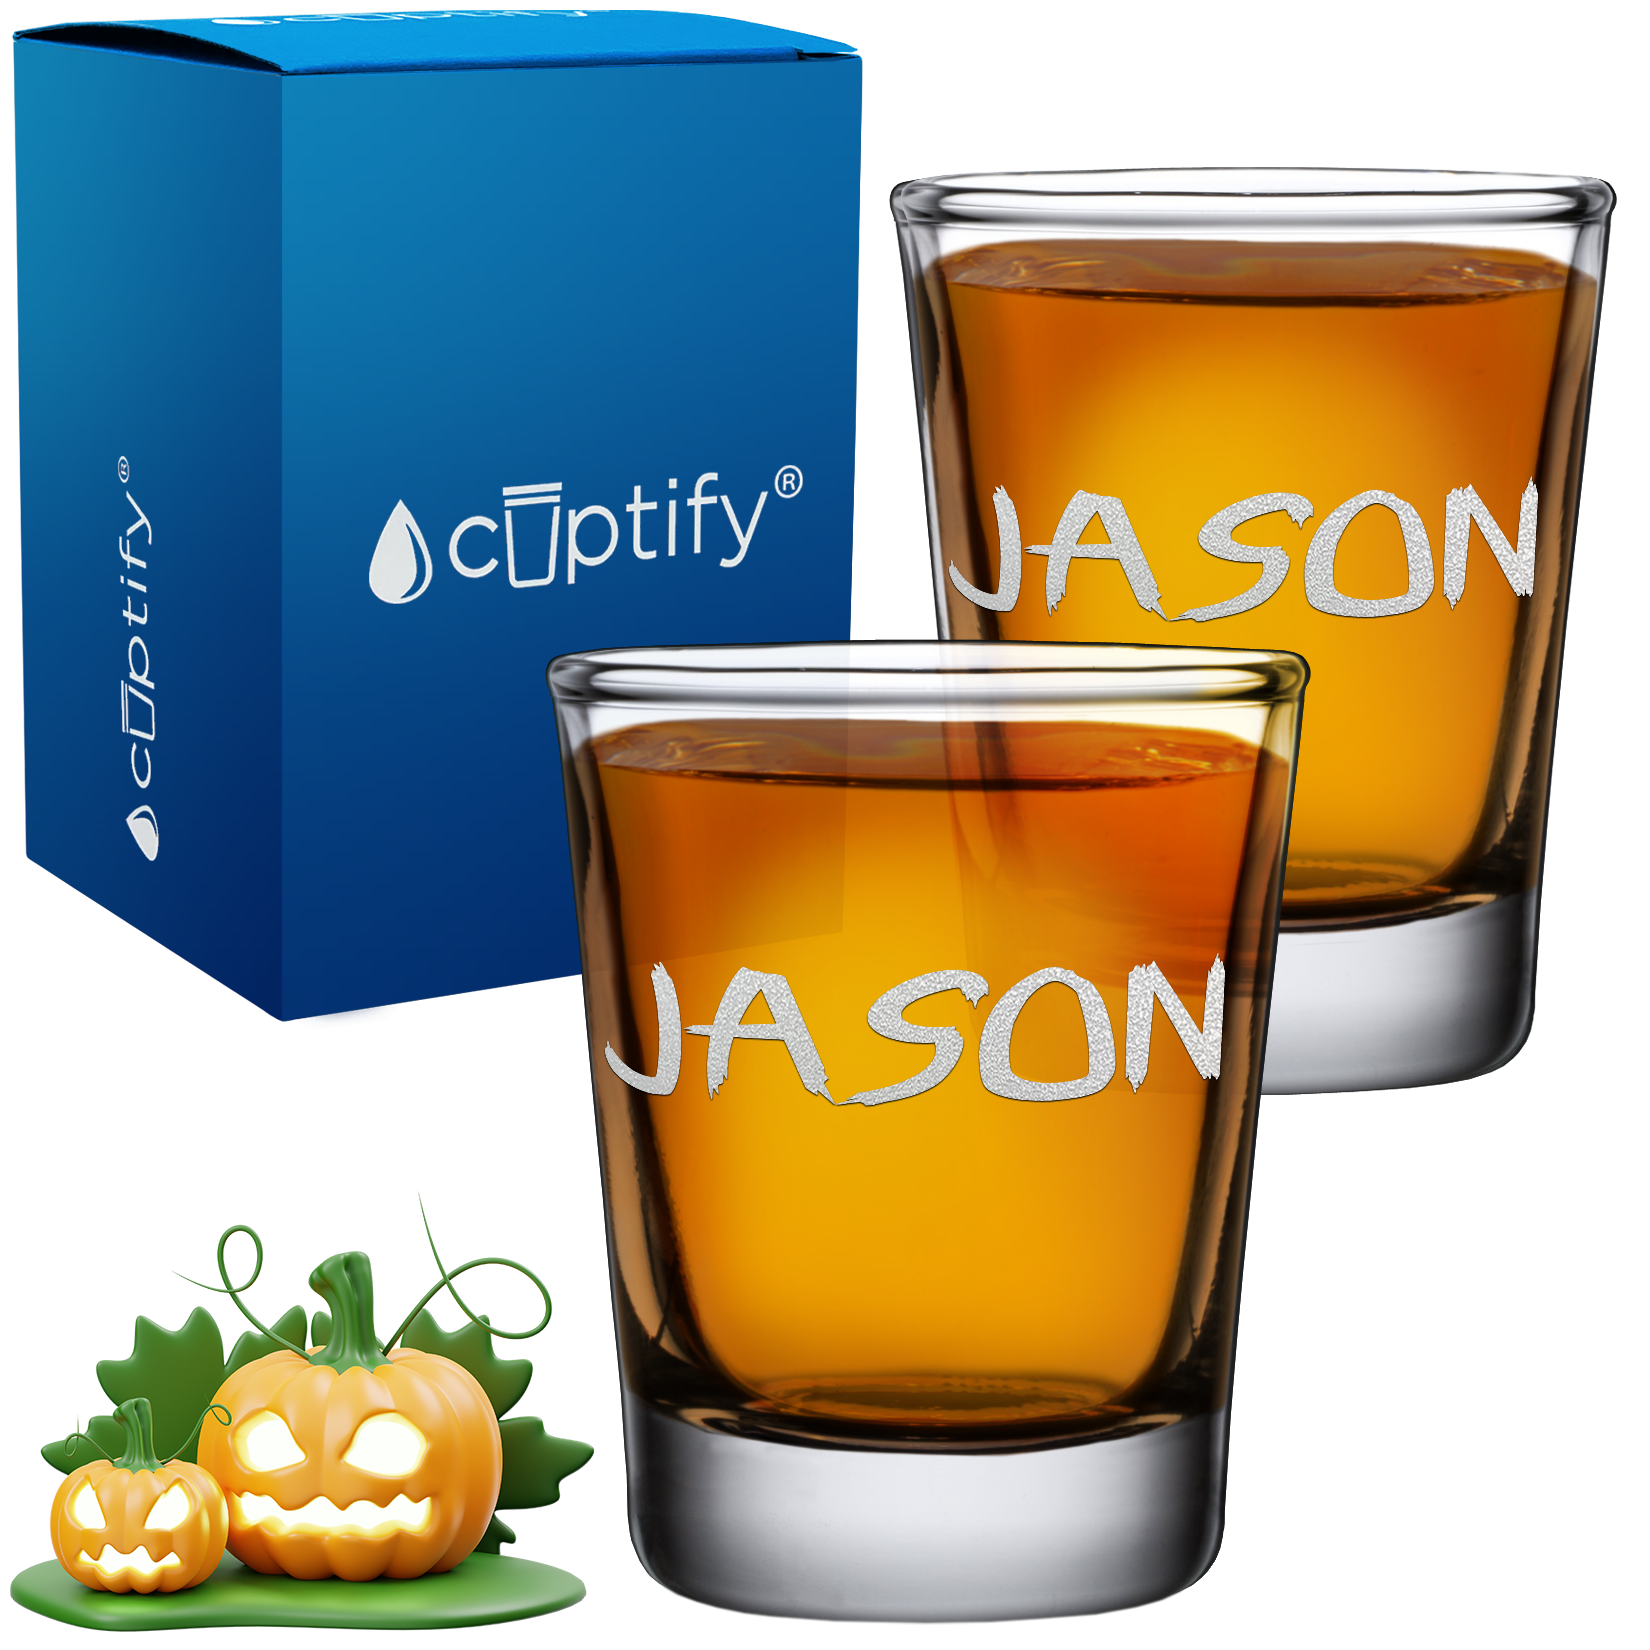 Personalized Scary Halloween Font 2oz Shot Glasses - Set of 2